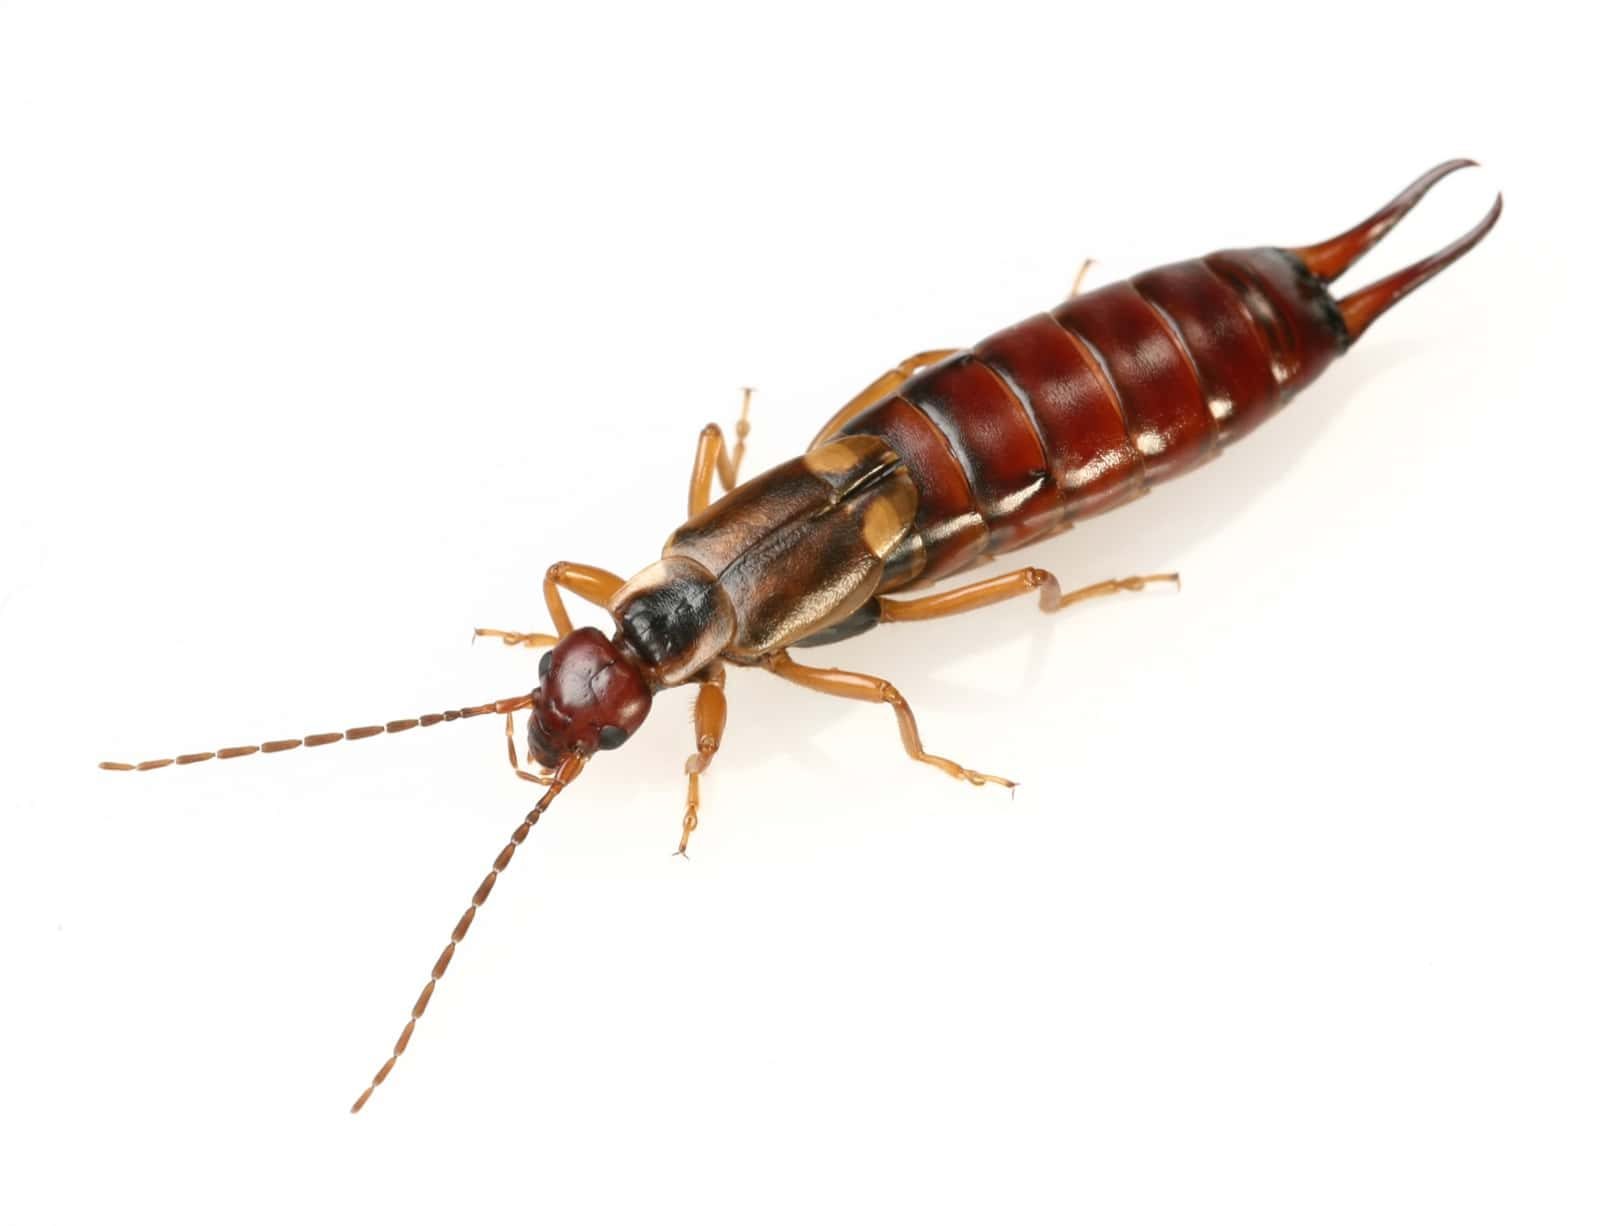 What does an earwig look like